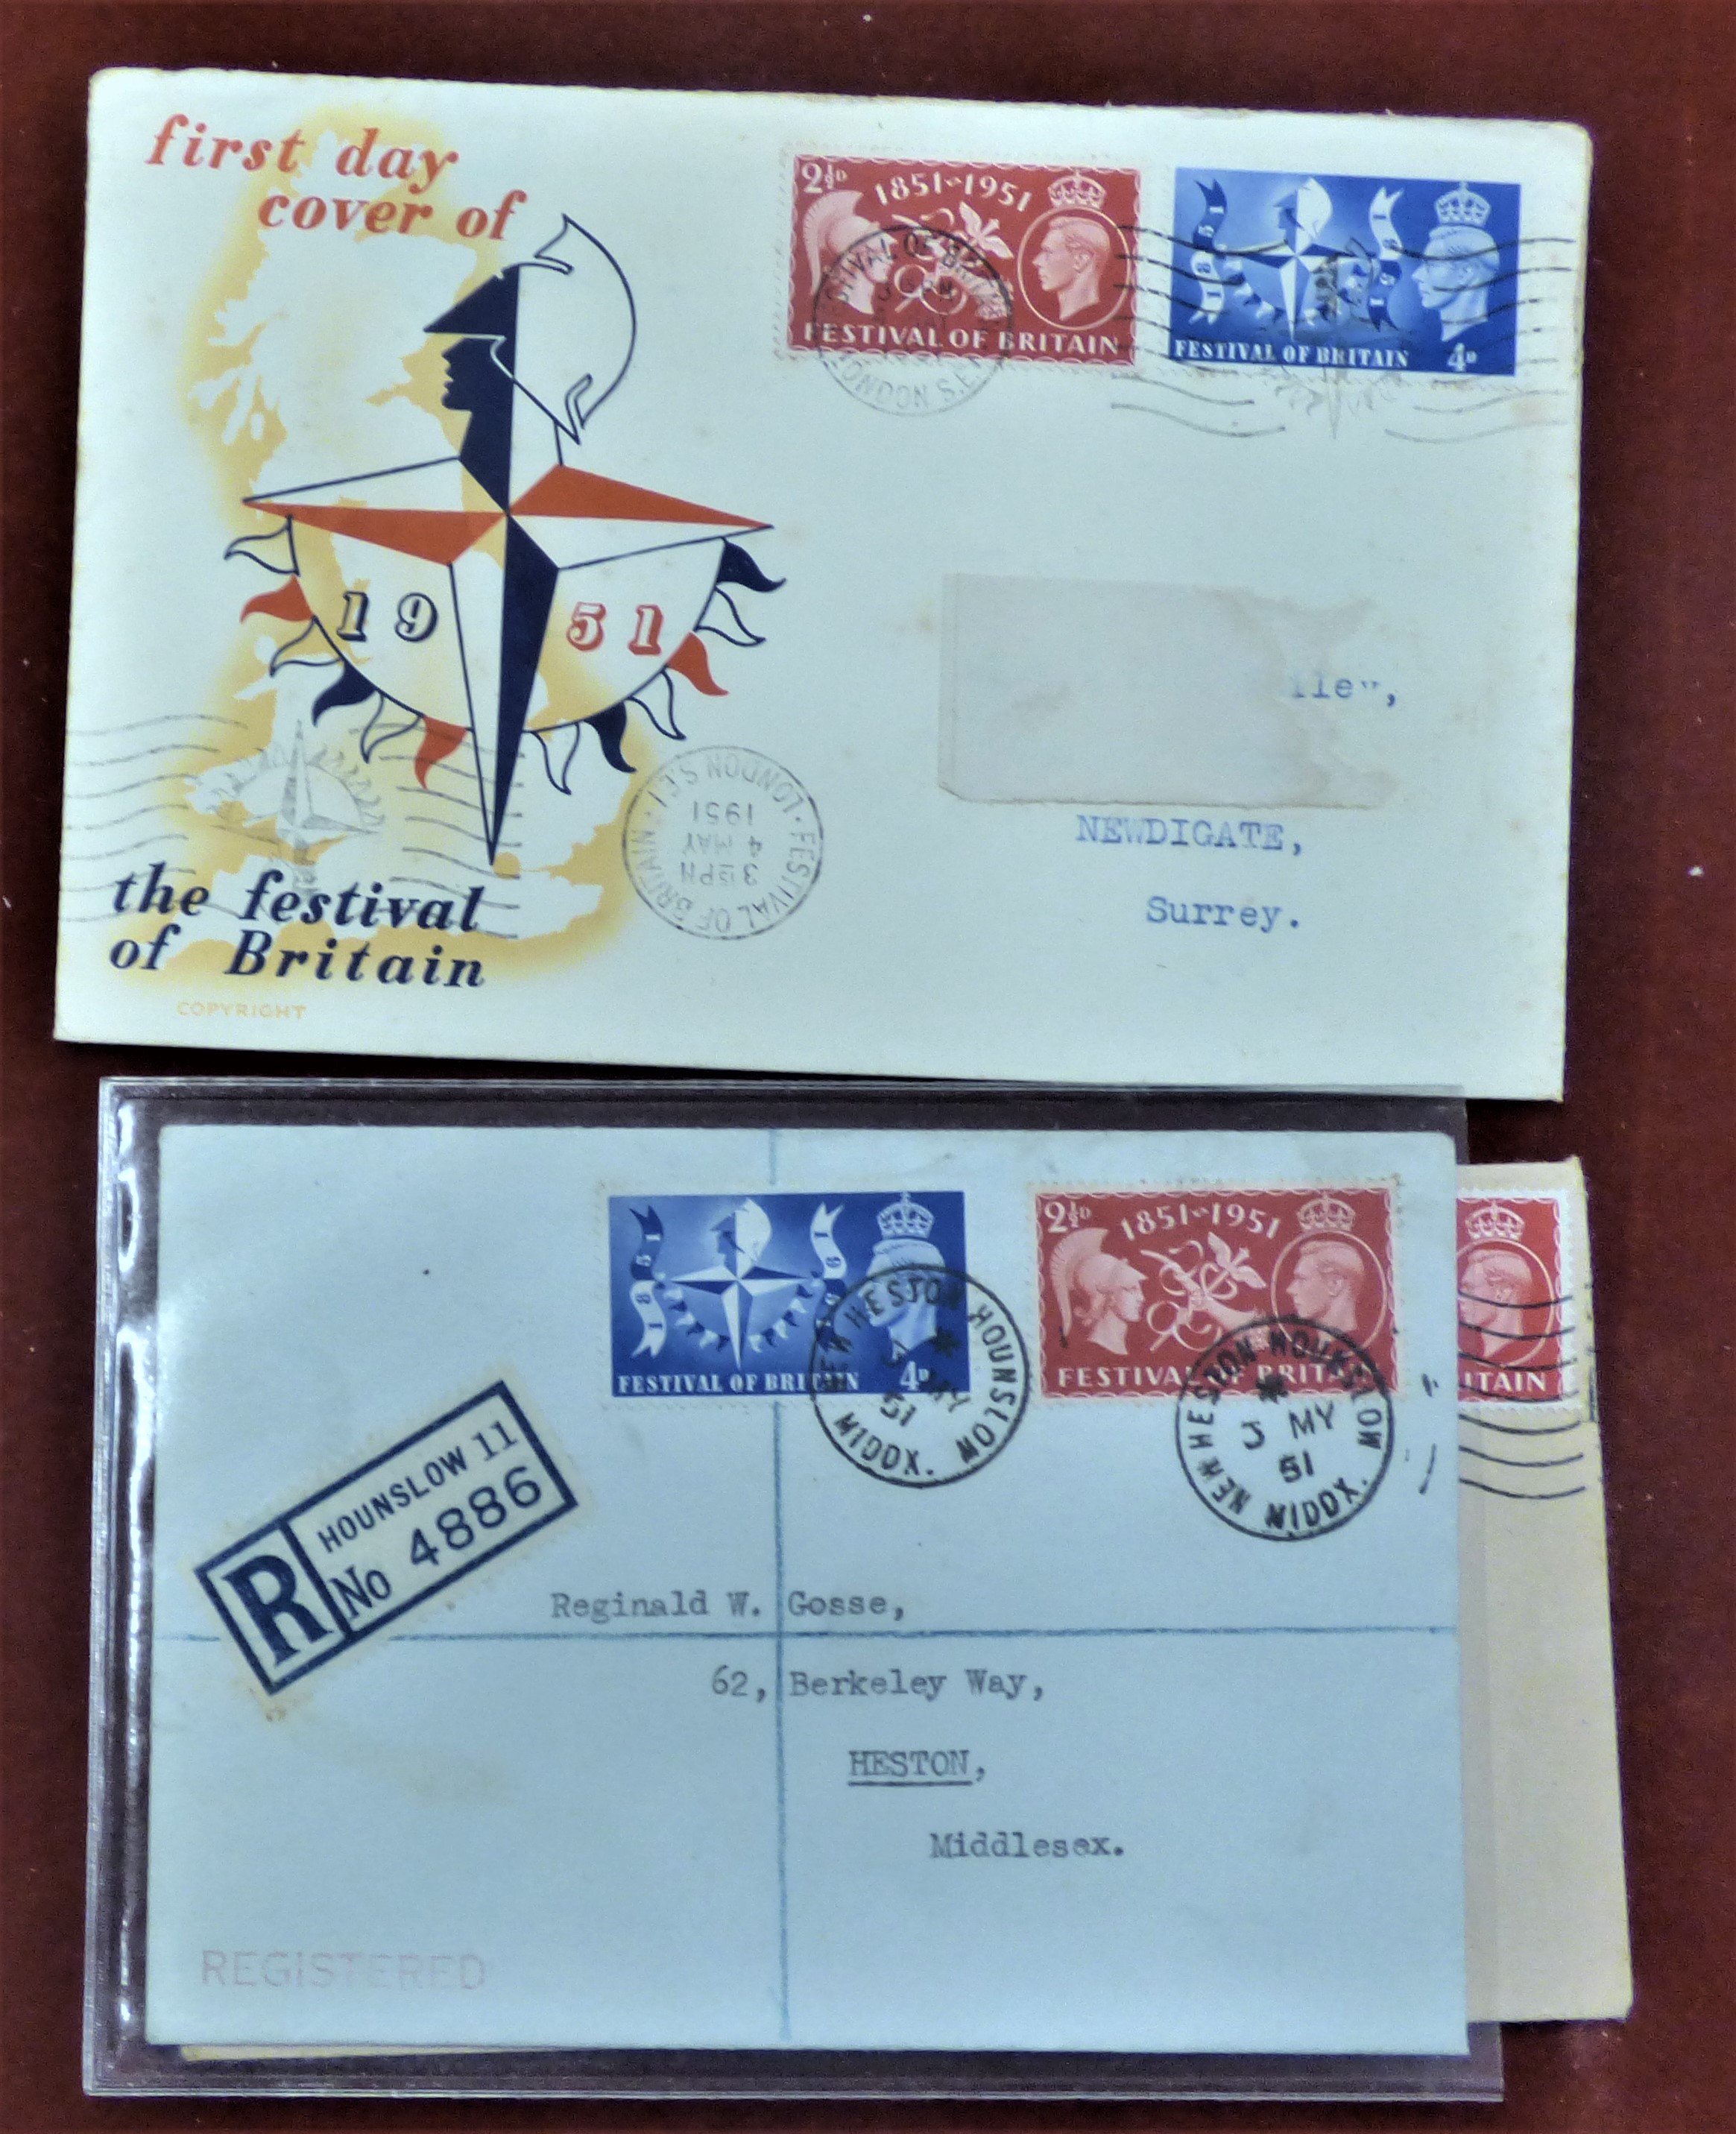 1951 Festival of Britain Stamp Set - 3rd May Hereford and Hounslow FD Issues (2) and 4 May